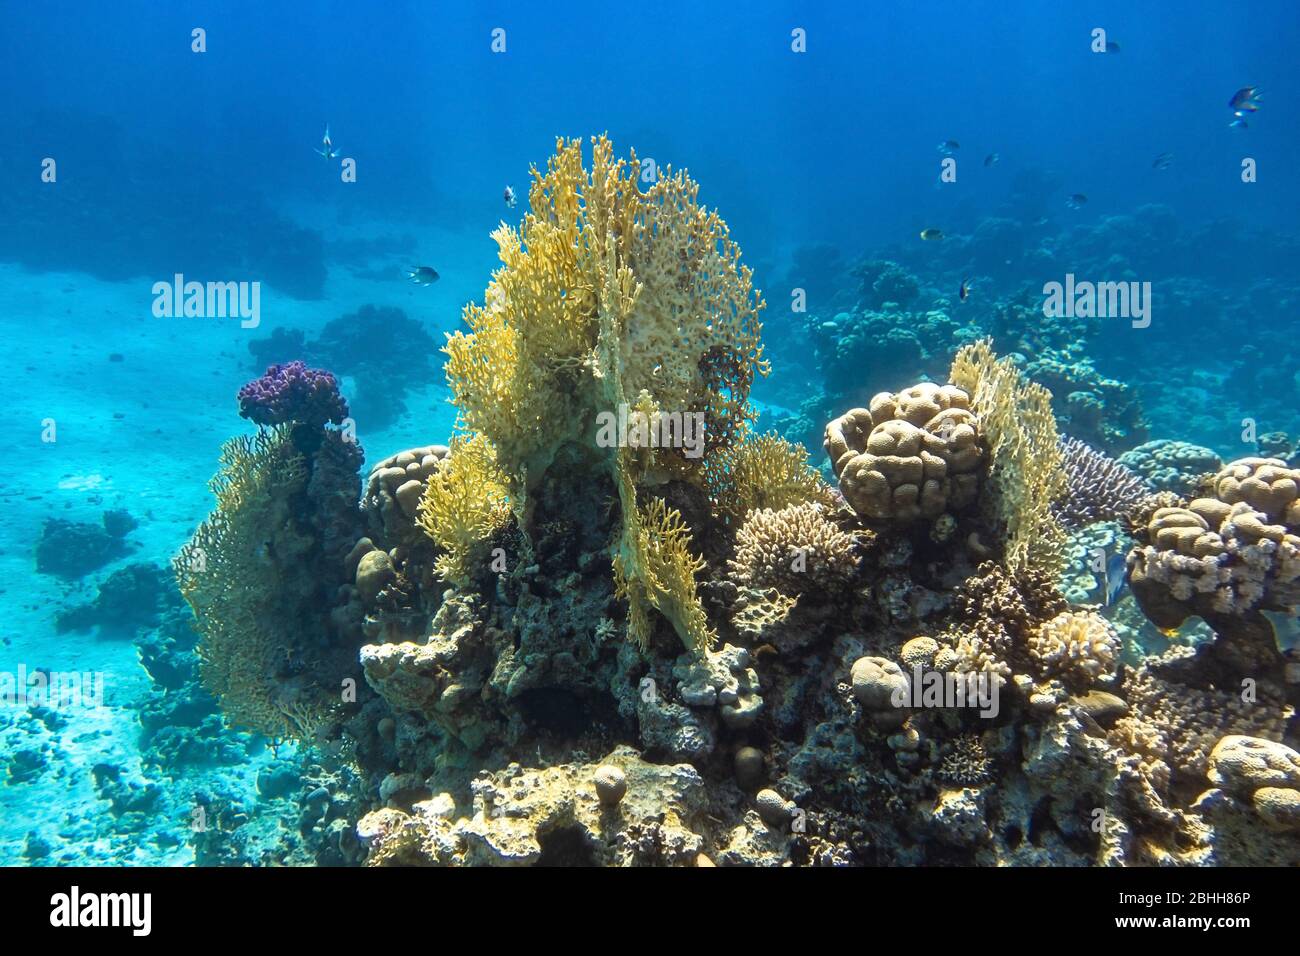 Coral Reef In Red Sea, Egypt. Blue Turquoise Ocean Water, Different Types Of Hard Corals. Branching Fire Coral, Horn Coral, Brain Coral. Underwater Di Stock Photo